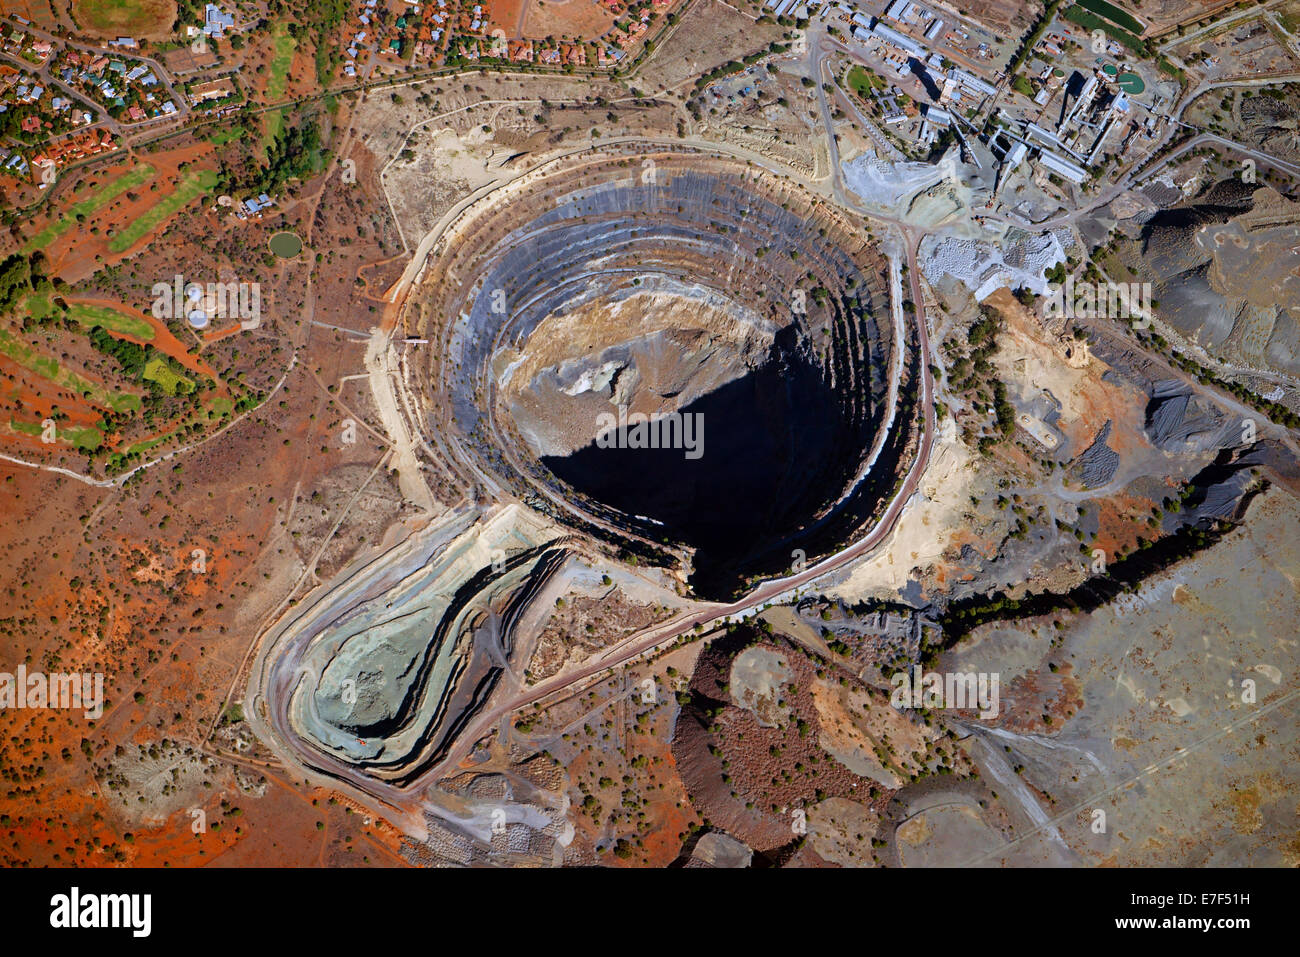 Aerial view, Koffiefontein diamond mine, Koffiefontein, Free State Province, South Africa Stock Photo